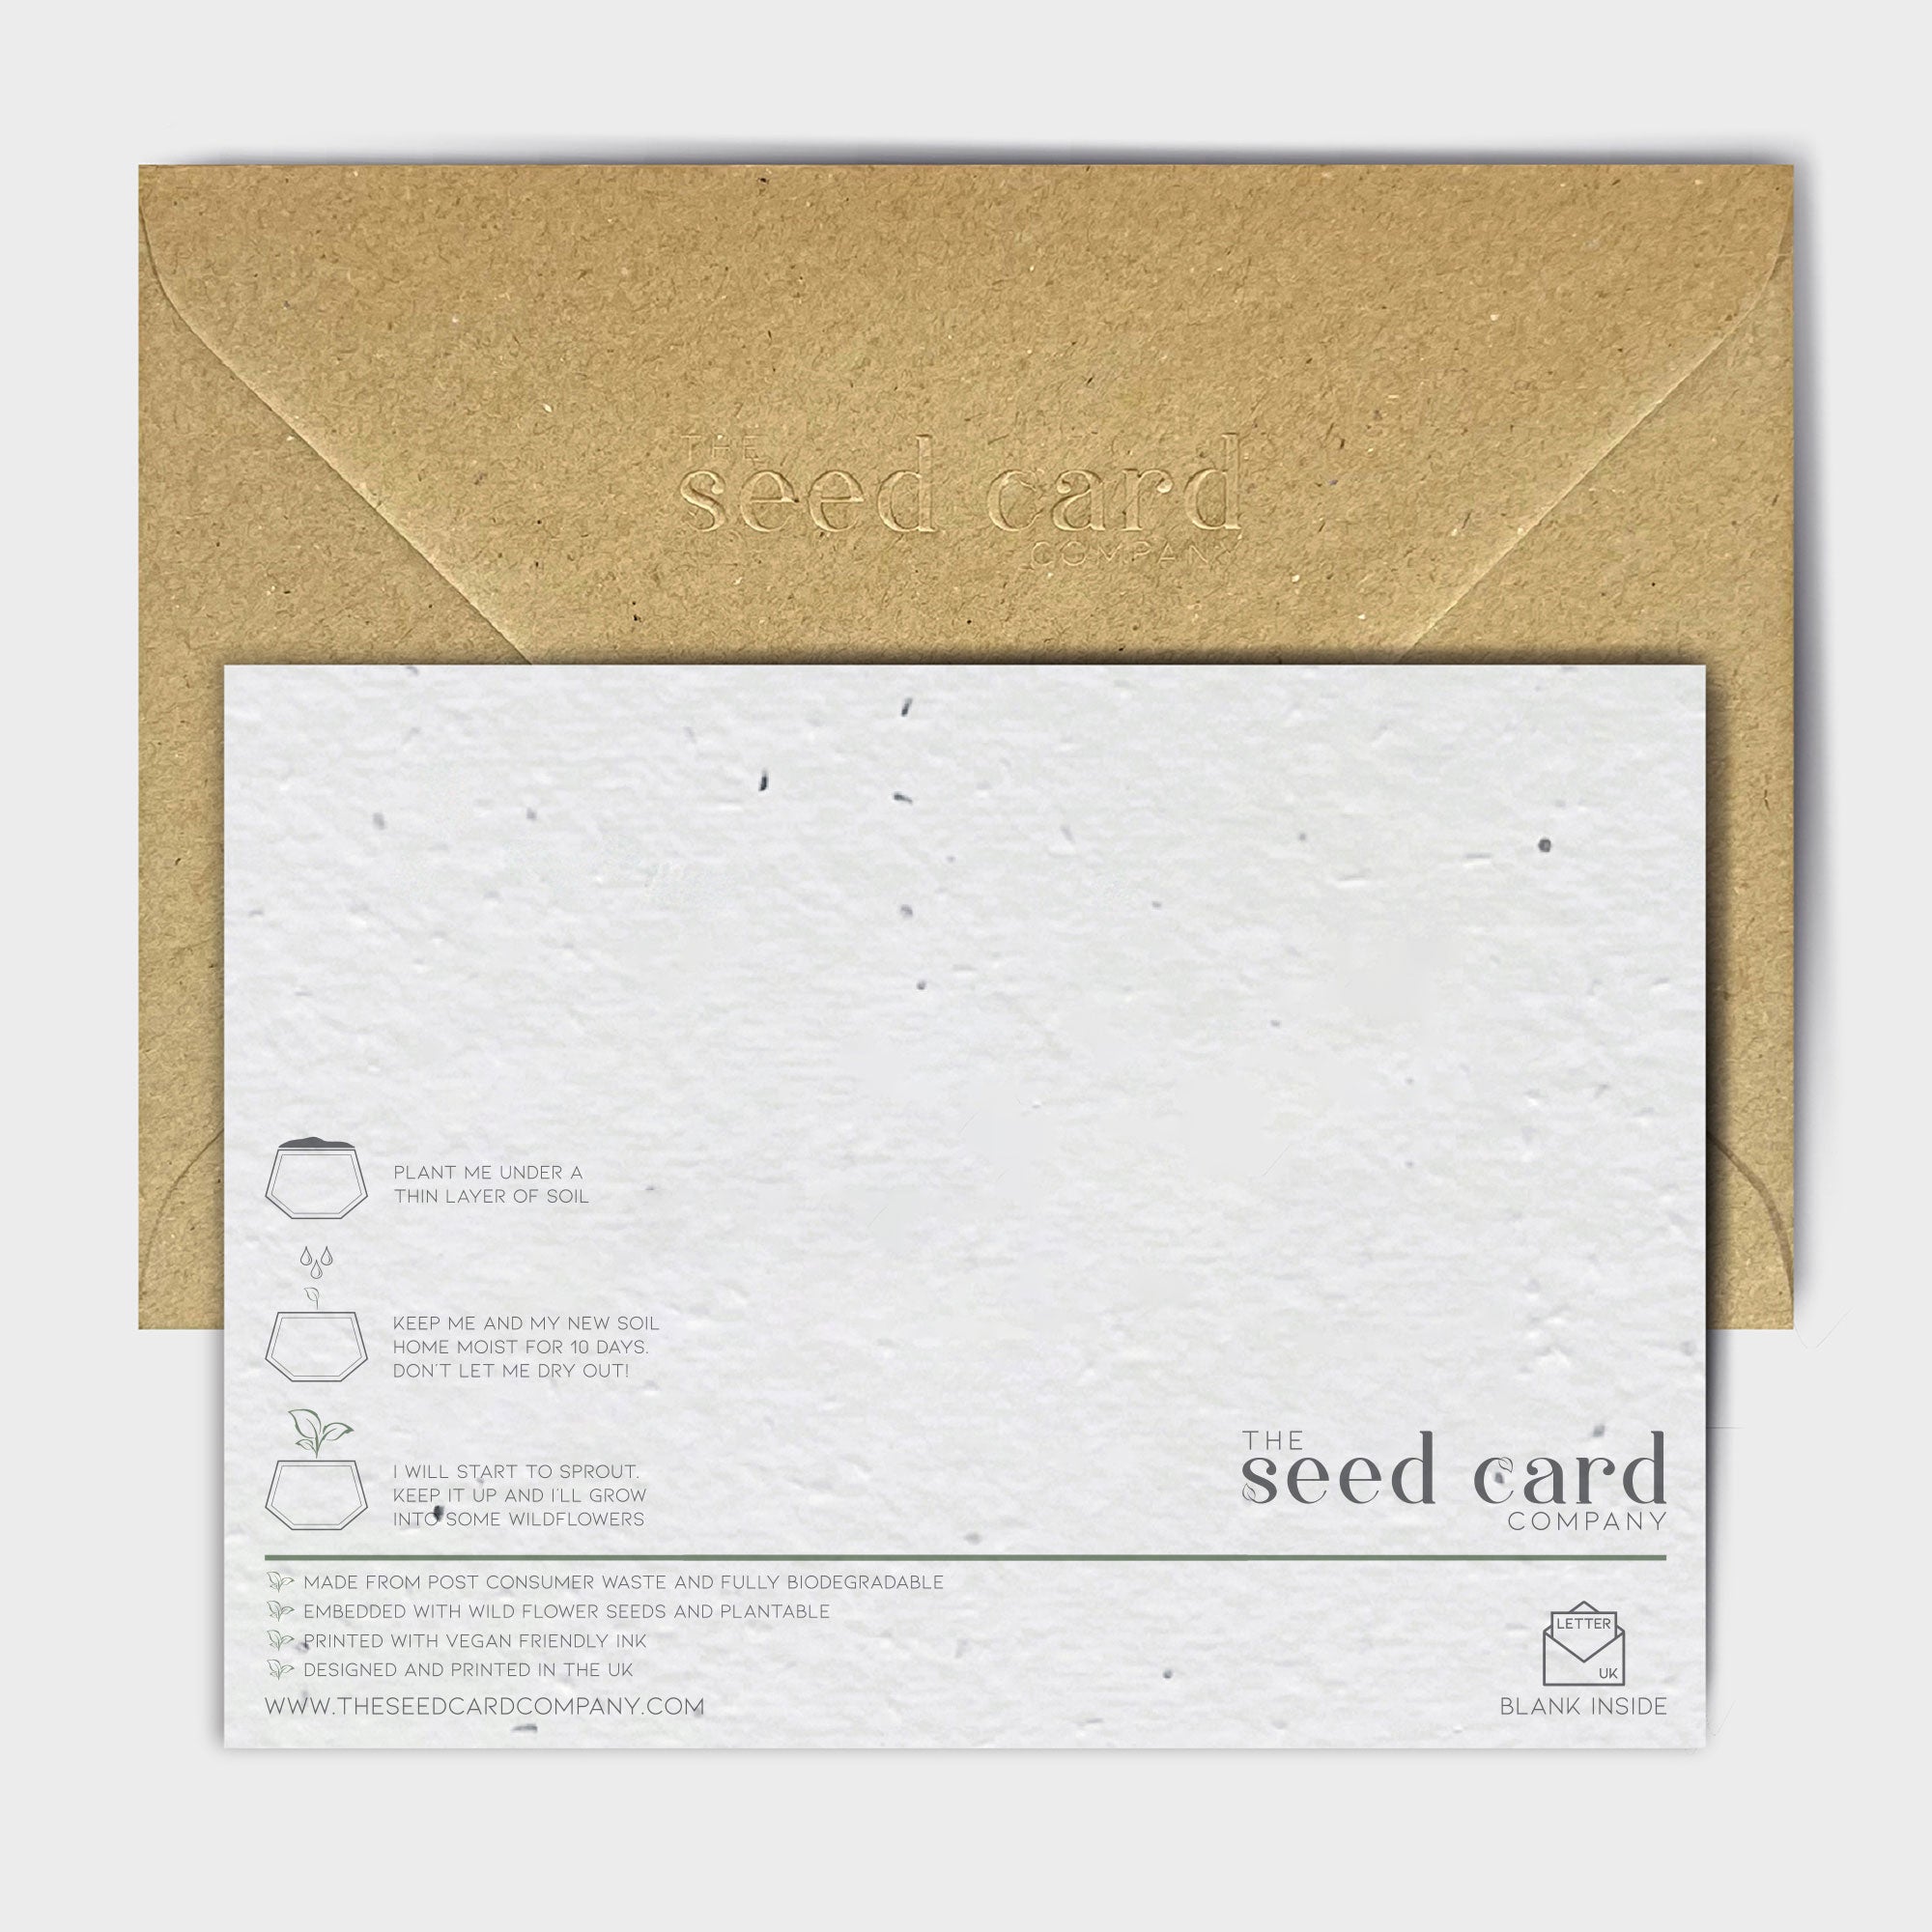 Shop online Vielen Dank - 100% biodegradable seed-embedded cards Shop -The Seed Card Company